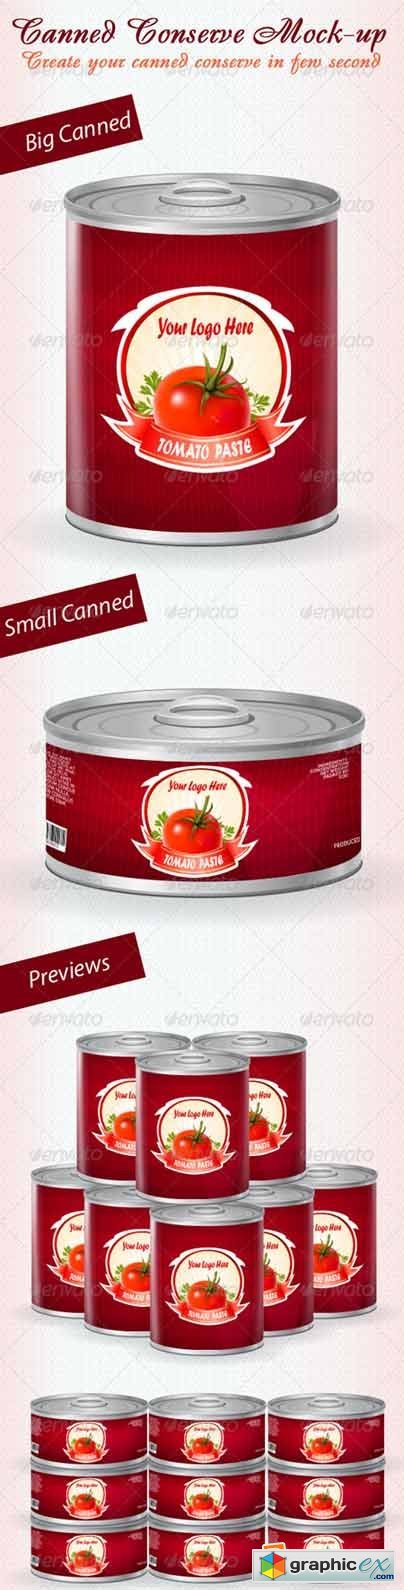 Canned Conserve Mock-up 460077